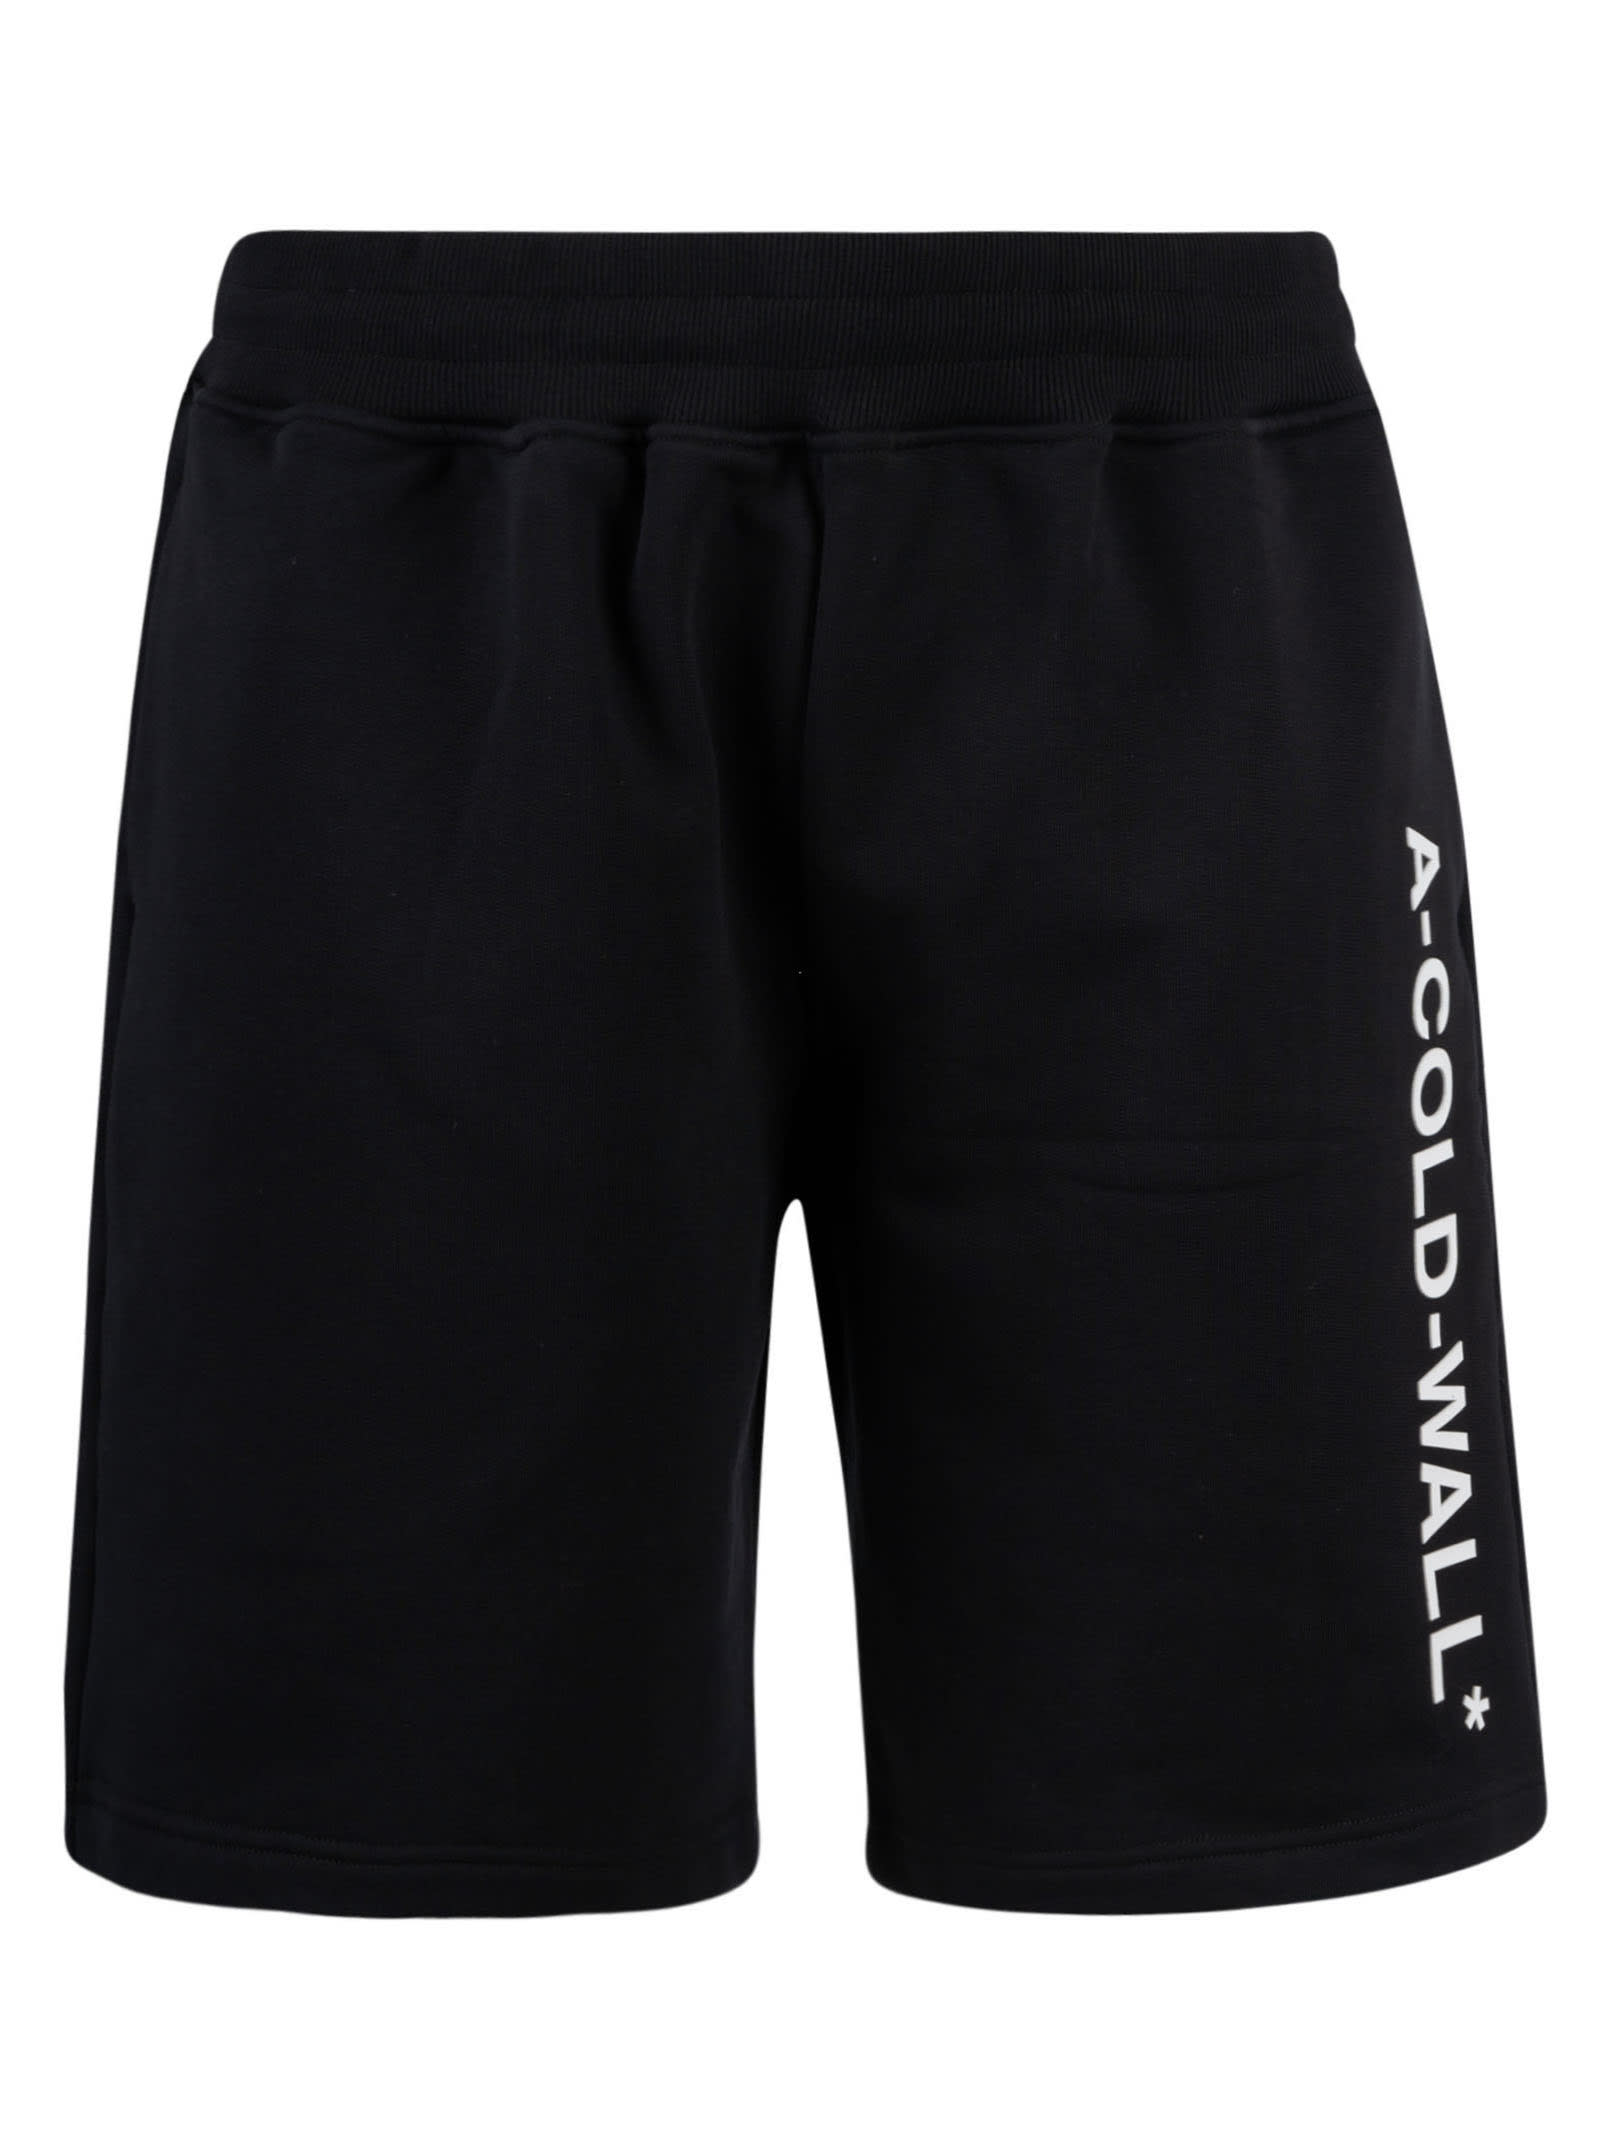 A-COLD-WALL Essential Logo Shorts